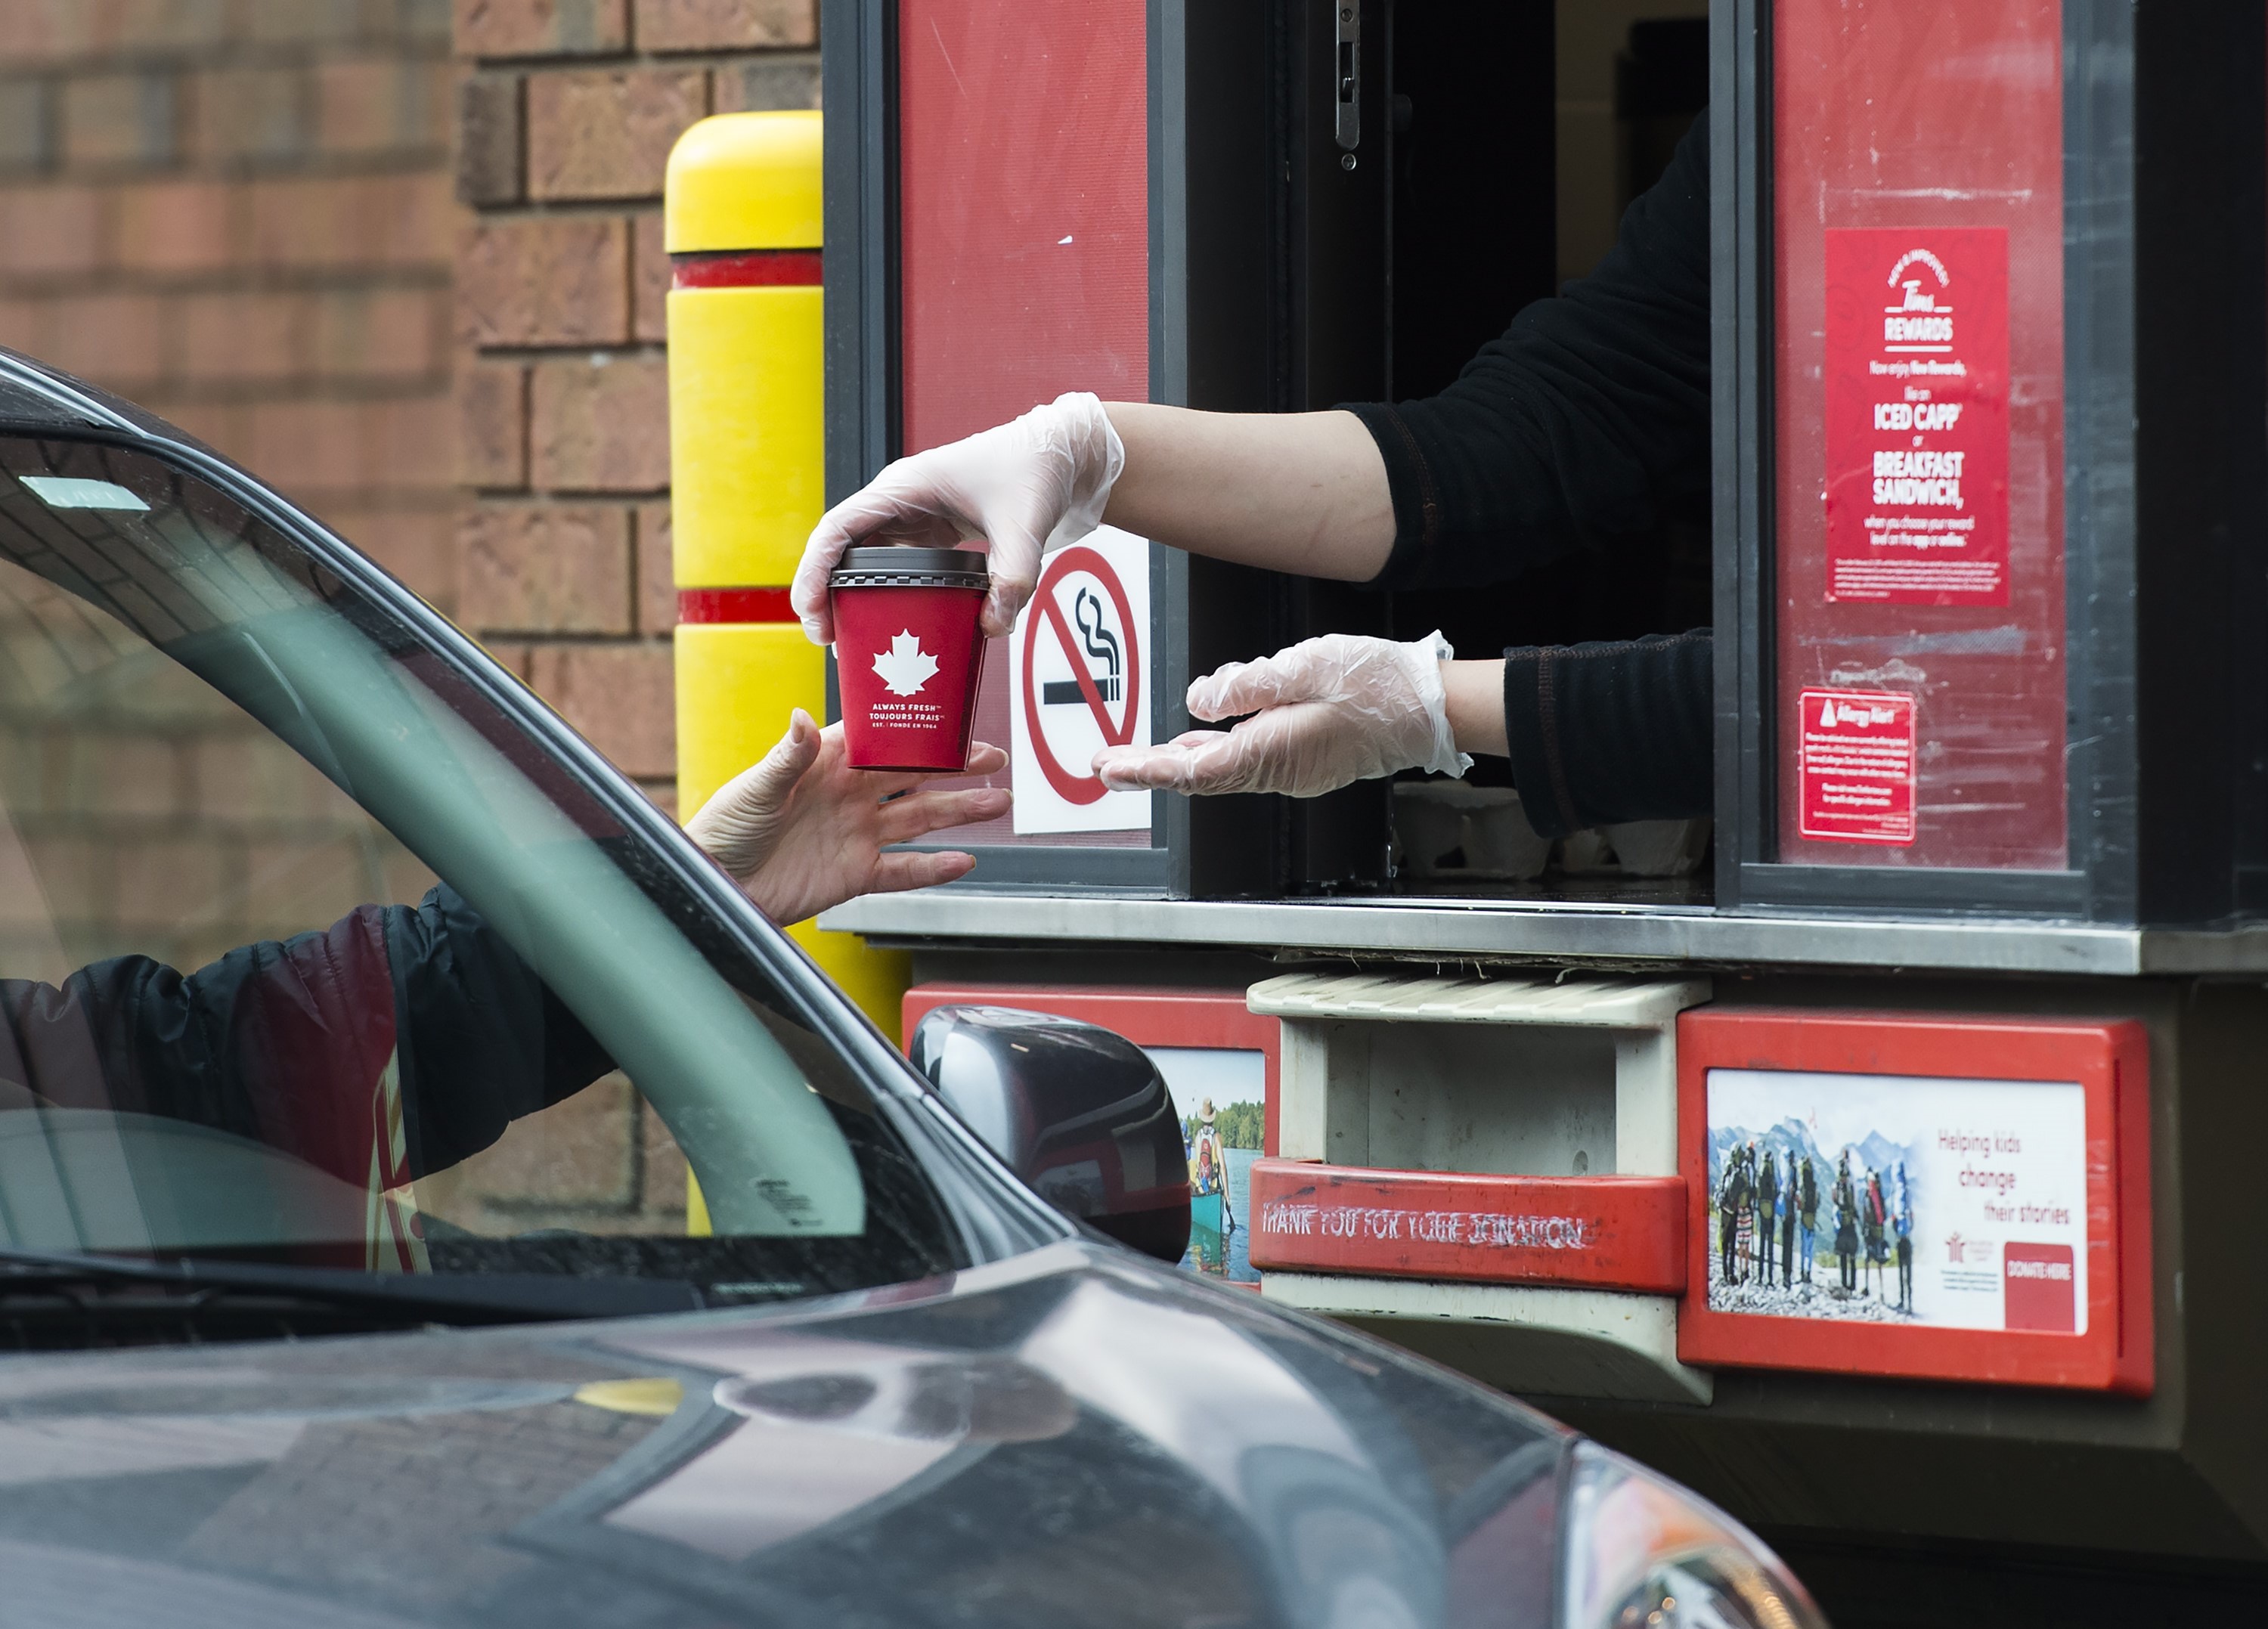 Tim Hortons to offer free coffee, doughnut to app users involved